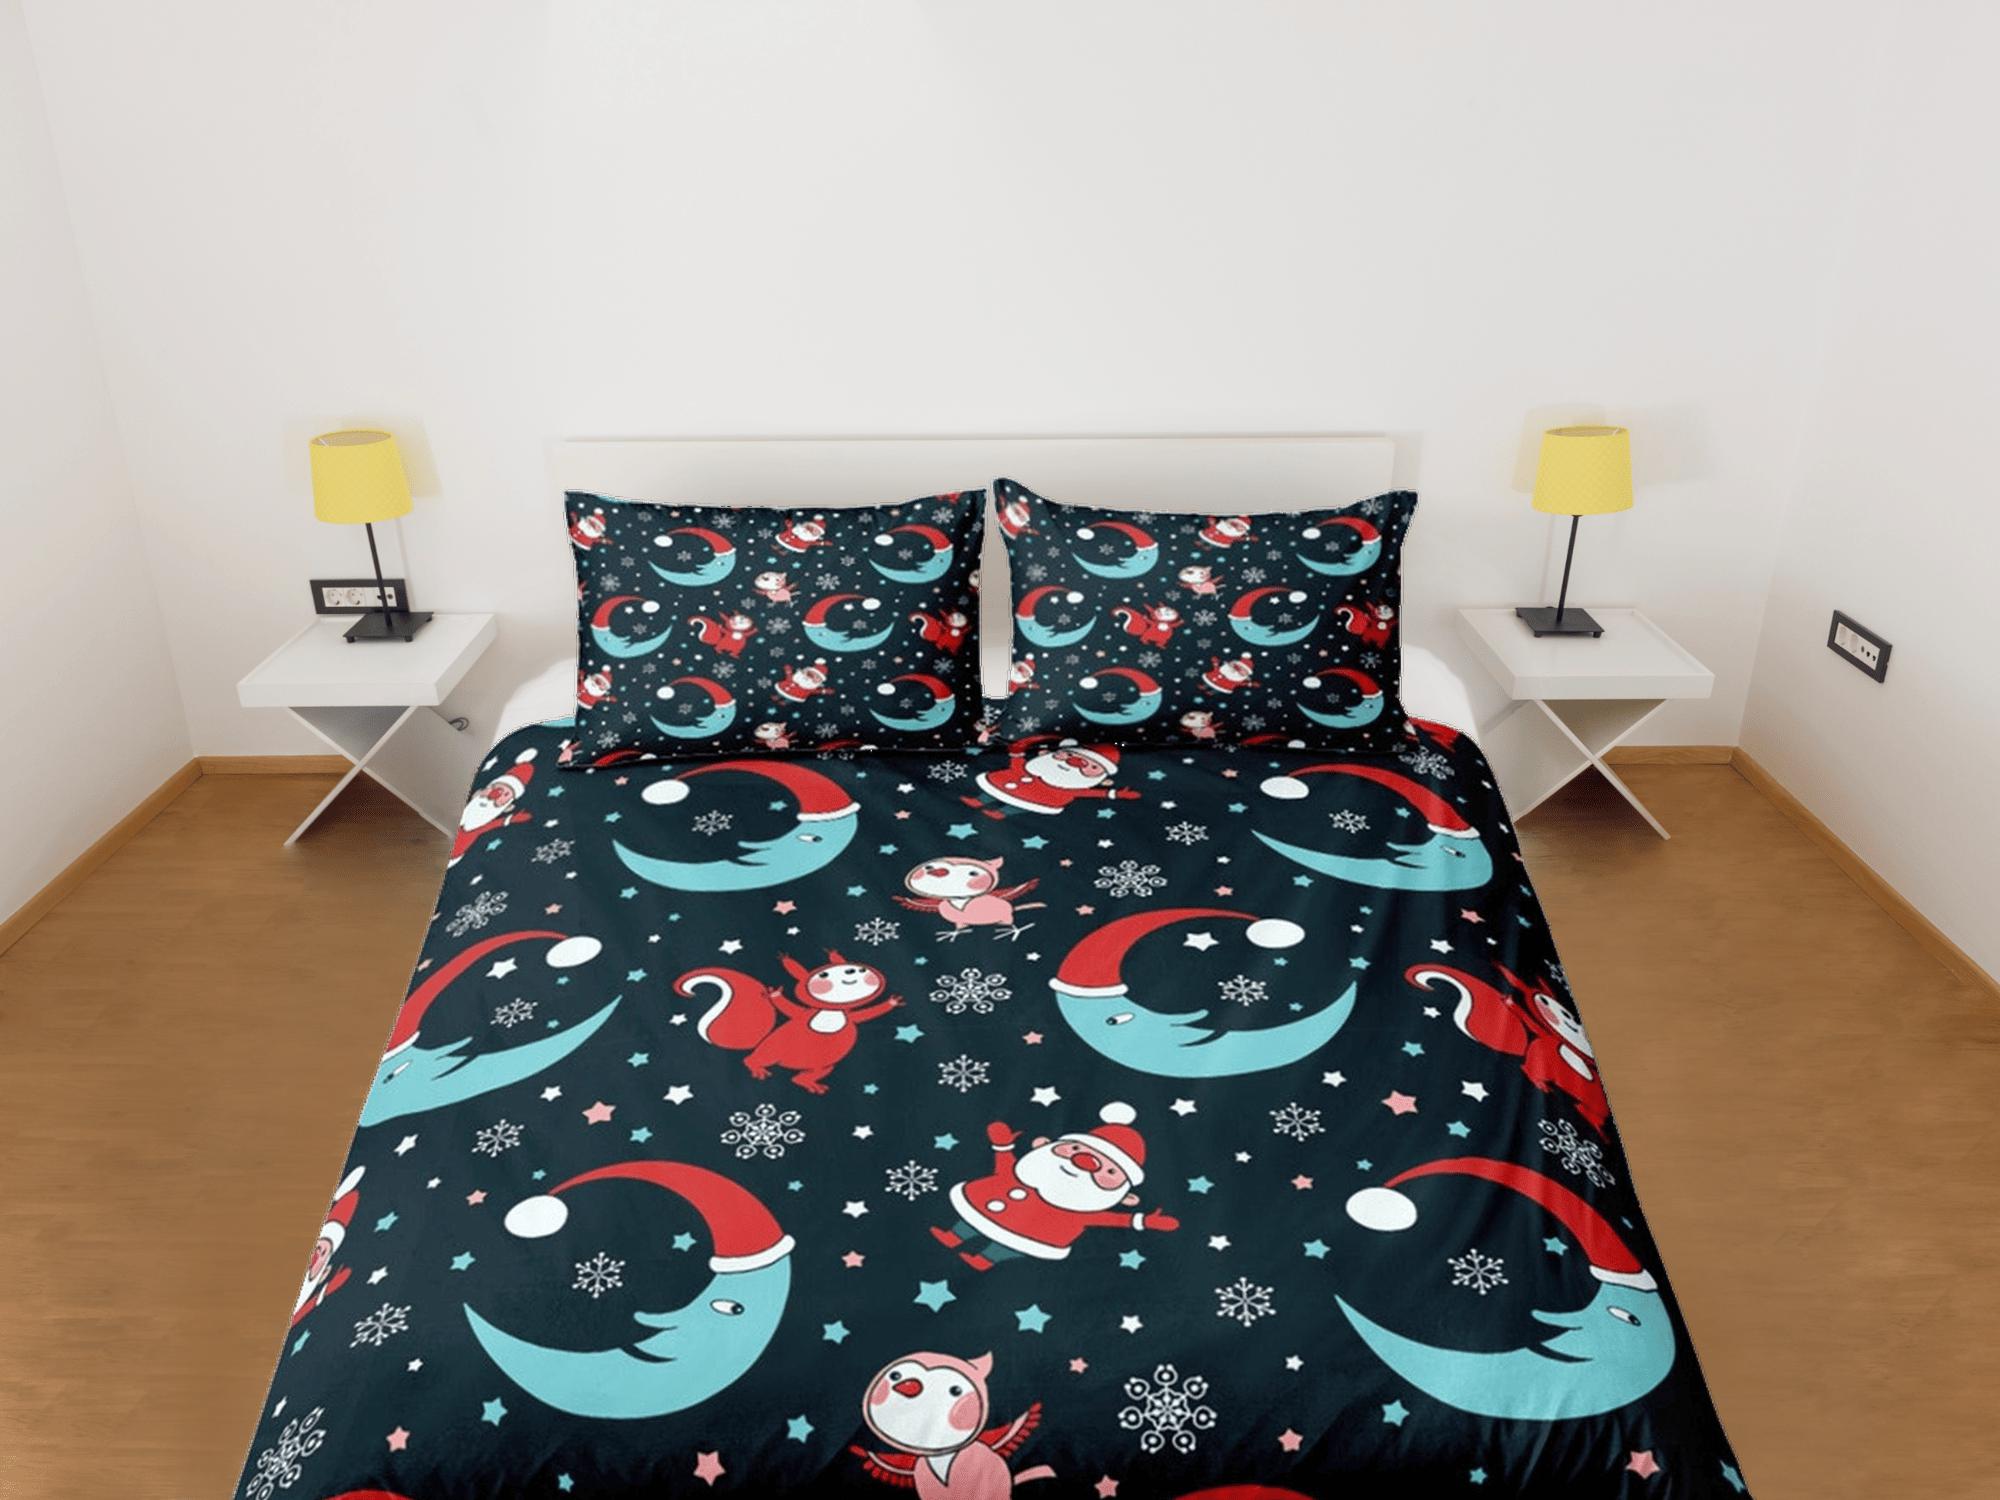 daintyduvet Blue moon and santa claus duvet cover set, christmas full size bedding & pillowcase, college bedding, crib toddler bedding, holiday gift